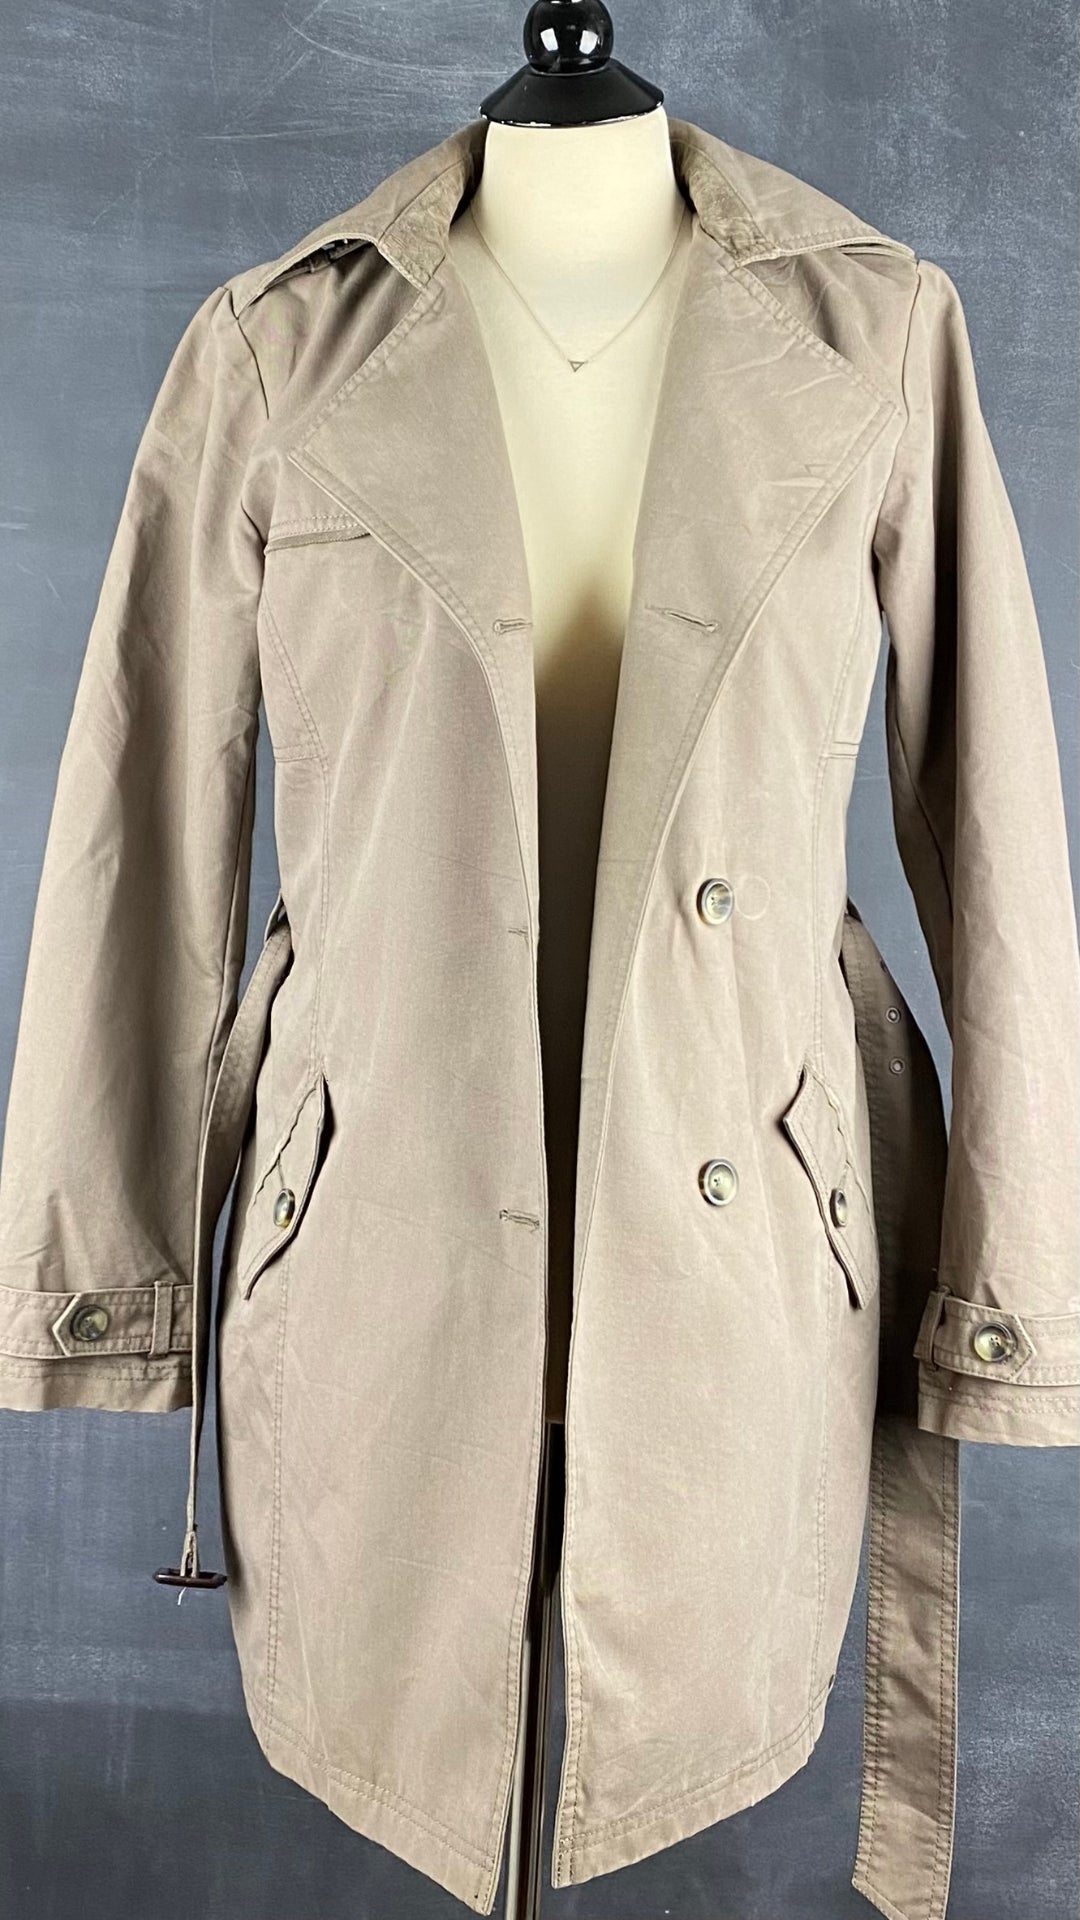 Trench neuf taupe Tom Tailor taille small. Vue de face, ouvert.